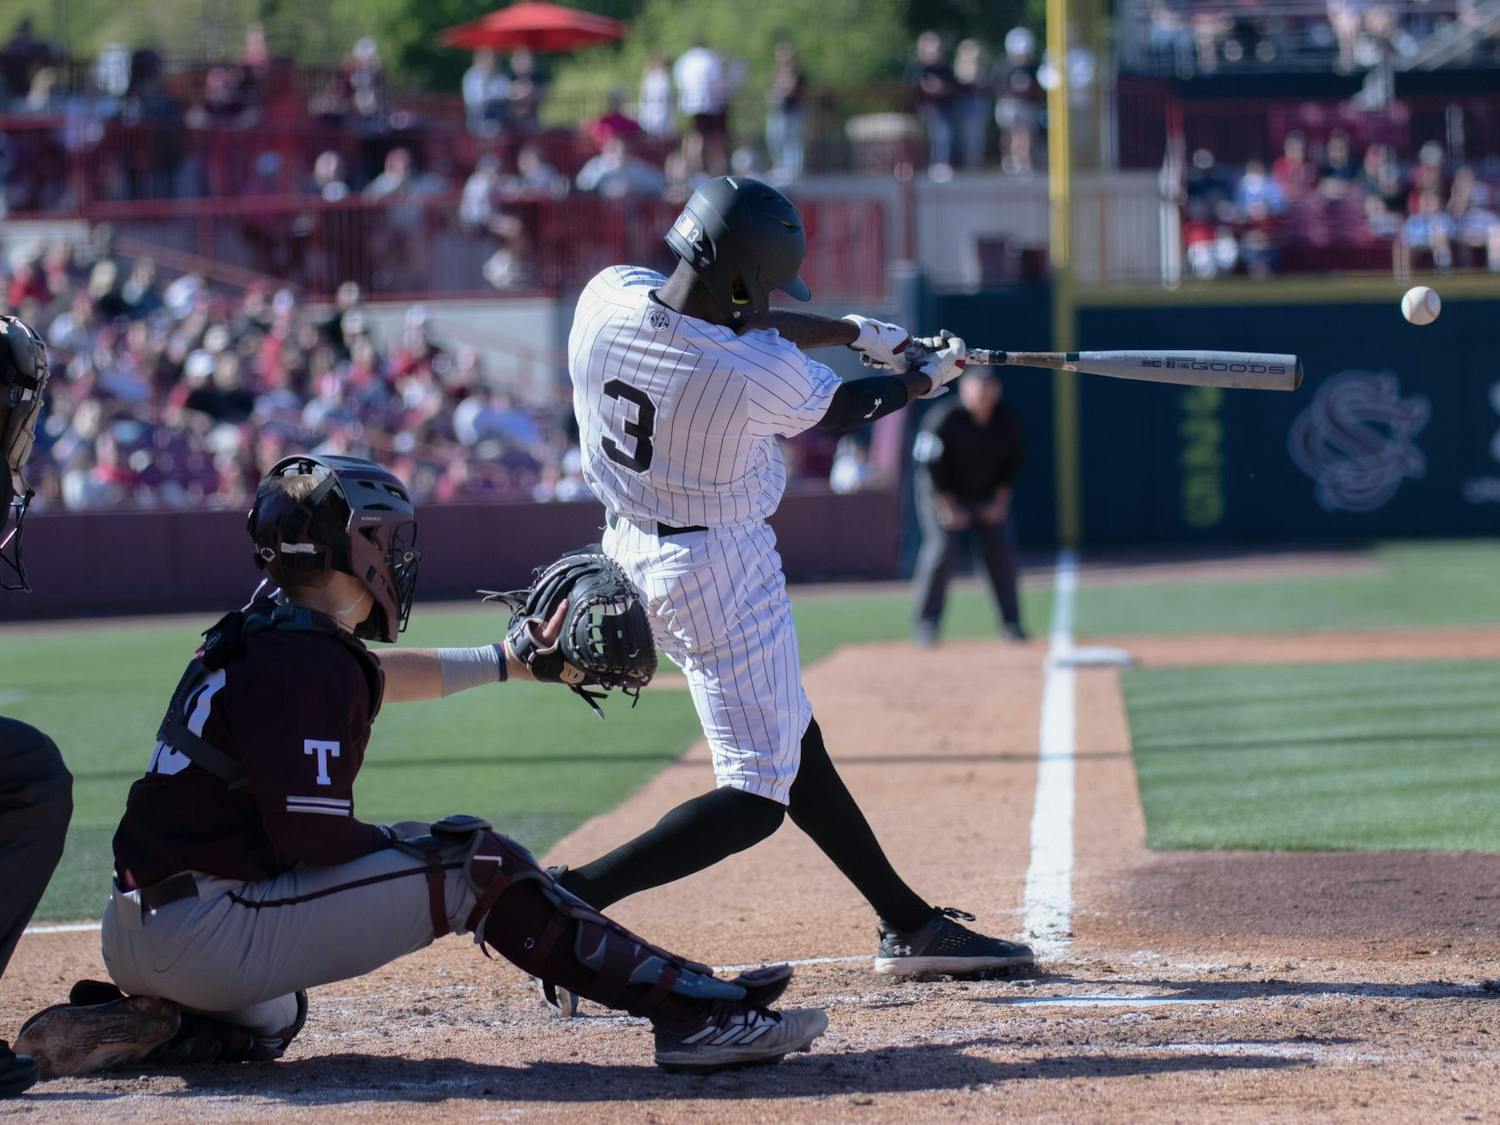 Freshman infielder Lee Ellis swings and hits the ball during South Carolina’s game against Texas A&amp;M on April 6, 2024. The Gamecocks lost 6-3 to the Aggies in the matchup.